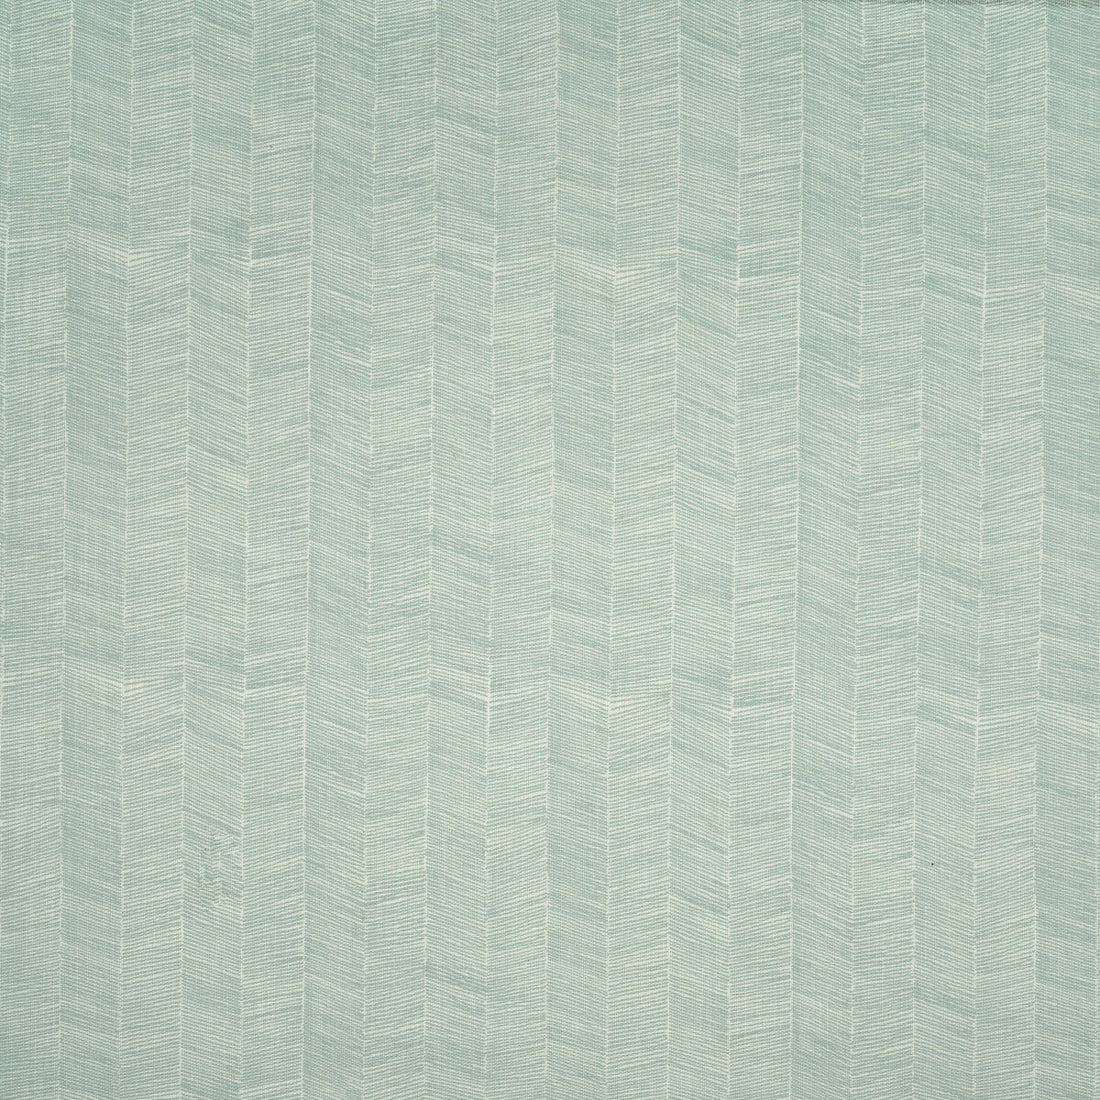 Delta Outdoor fabric in ice color - pattern AM100347.15.0 - by Kravet Couture in the Andrew Martin The Great Outdoors collection